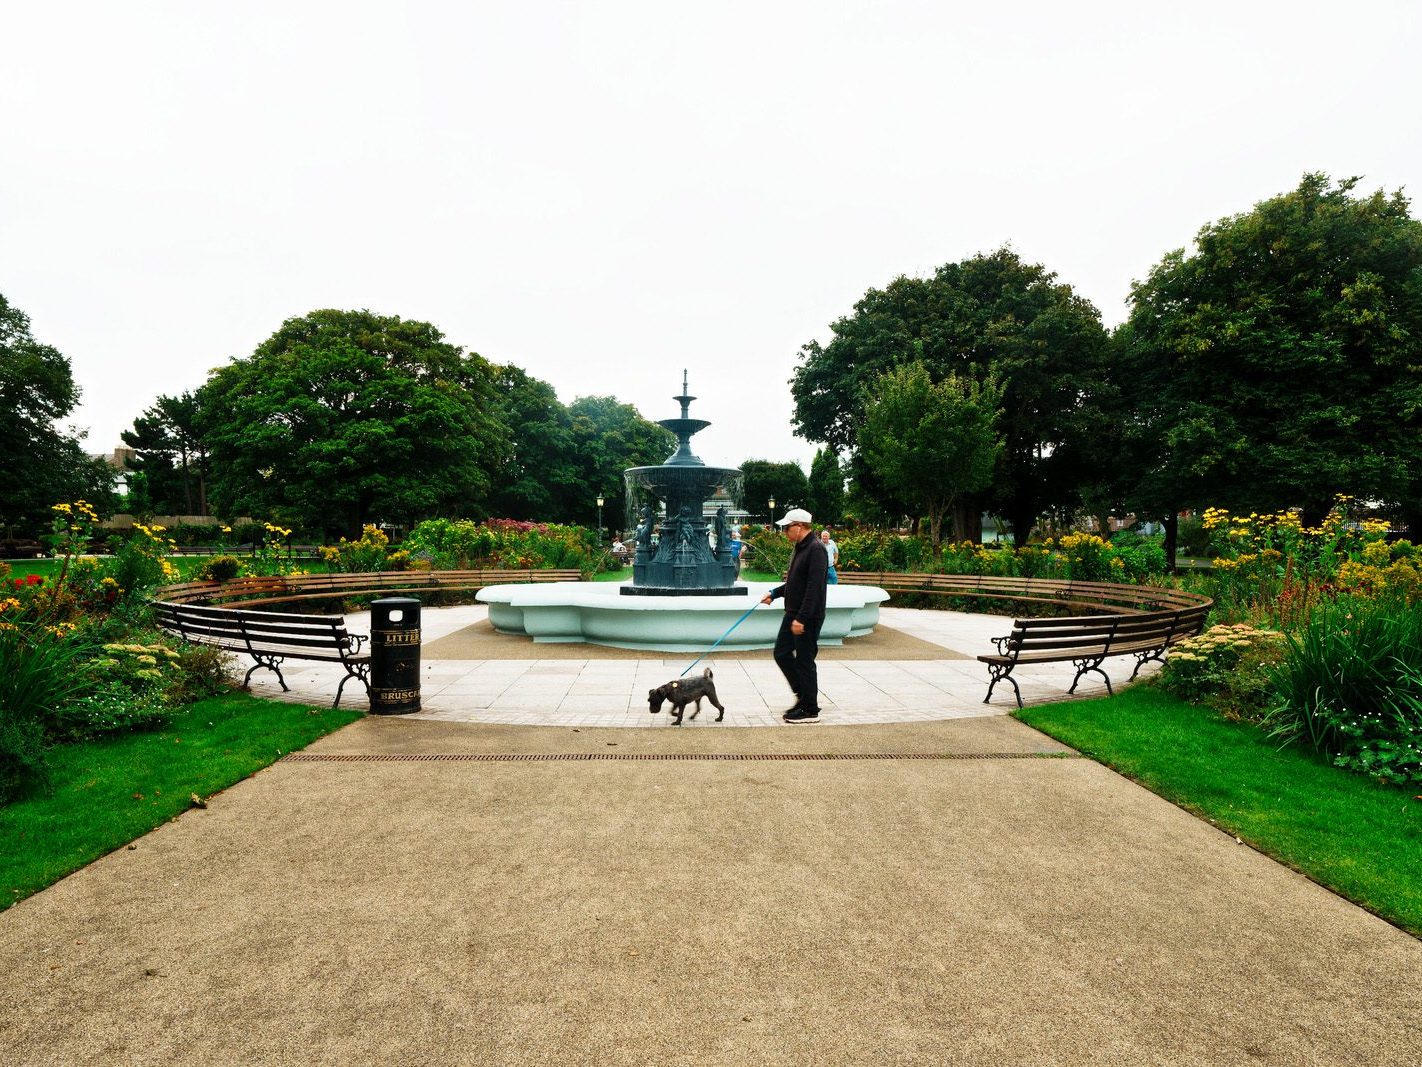 I REALLY LIKE THE PEOPLE'S PARK [AN ATTRACTIVE PUBLIC SPACE IN DUN LAOGHAIRE] 001